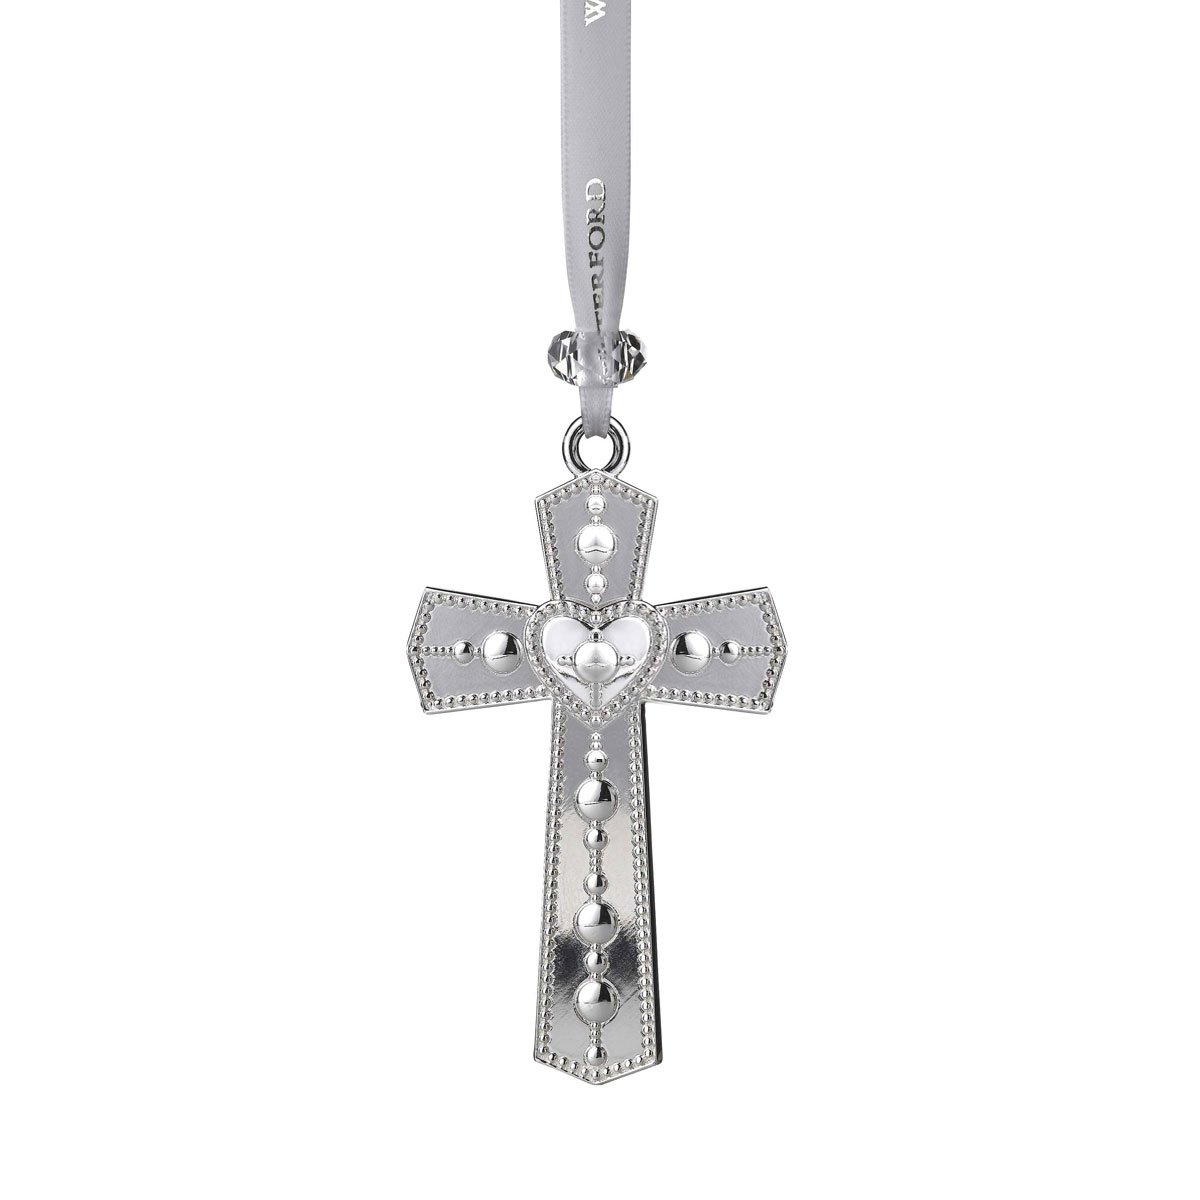 Waterford 2022 Silver Cross Ornament